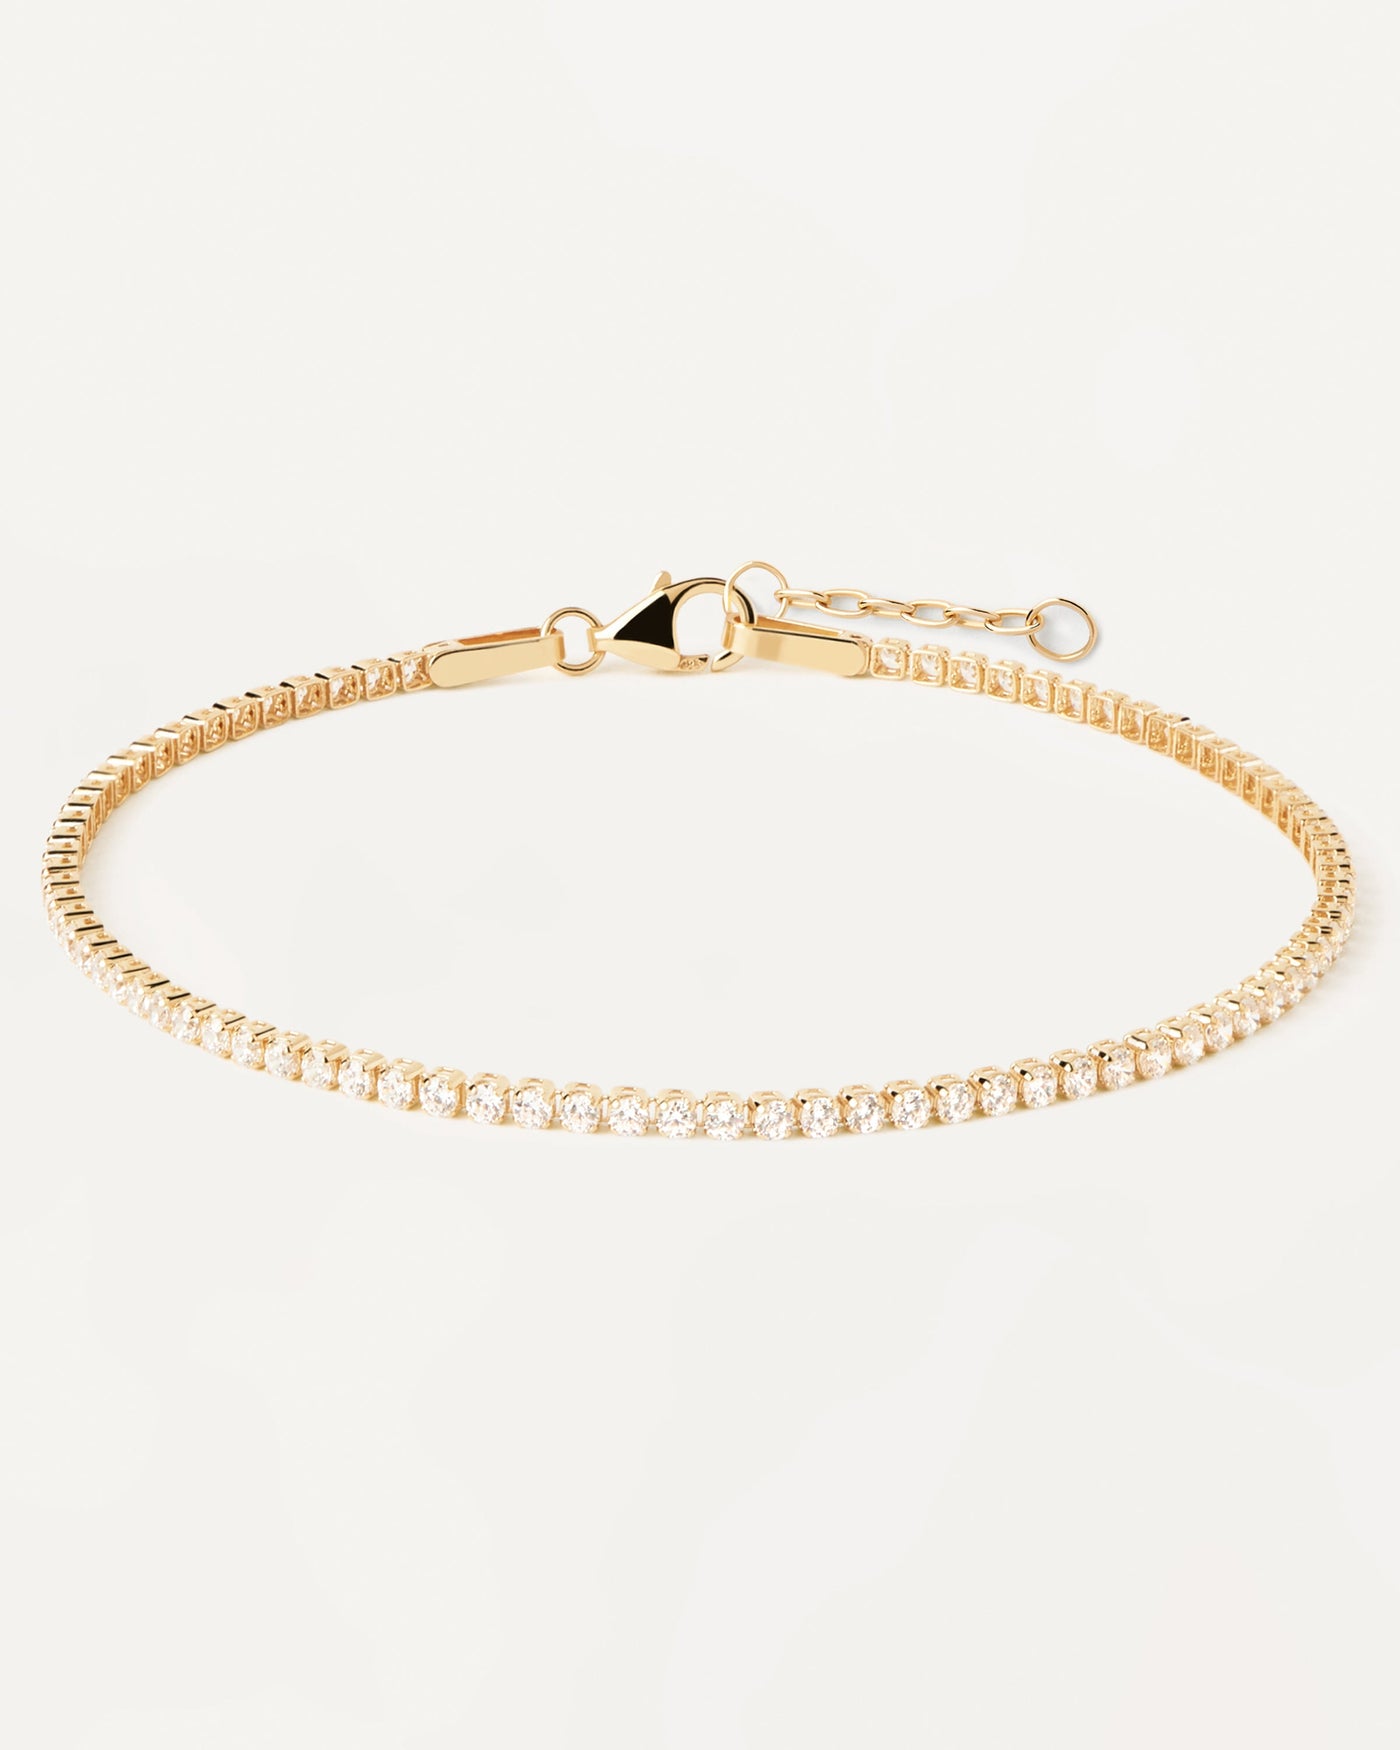 2023 Selection | Diamonds and Gold Tennis Bracelet. Solid yellow gold bracelet with tennis chain and lab-grown diamonds. Get the latest arrival from PDPAOLA. Place your order safely and get this Best Seller. Free Shipping.